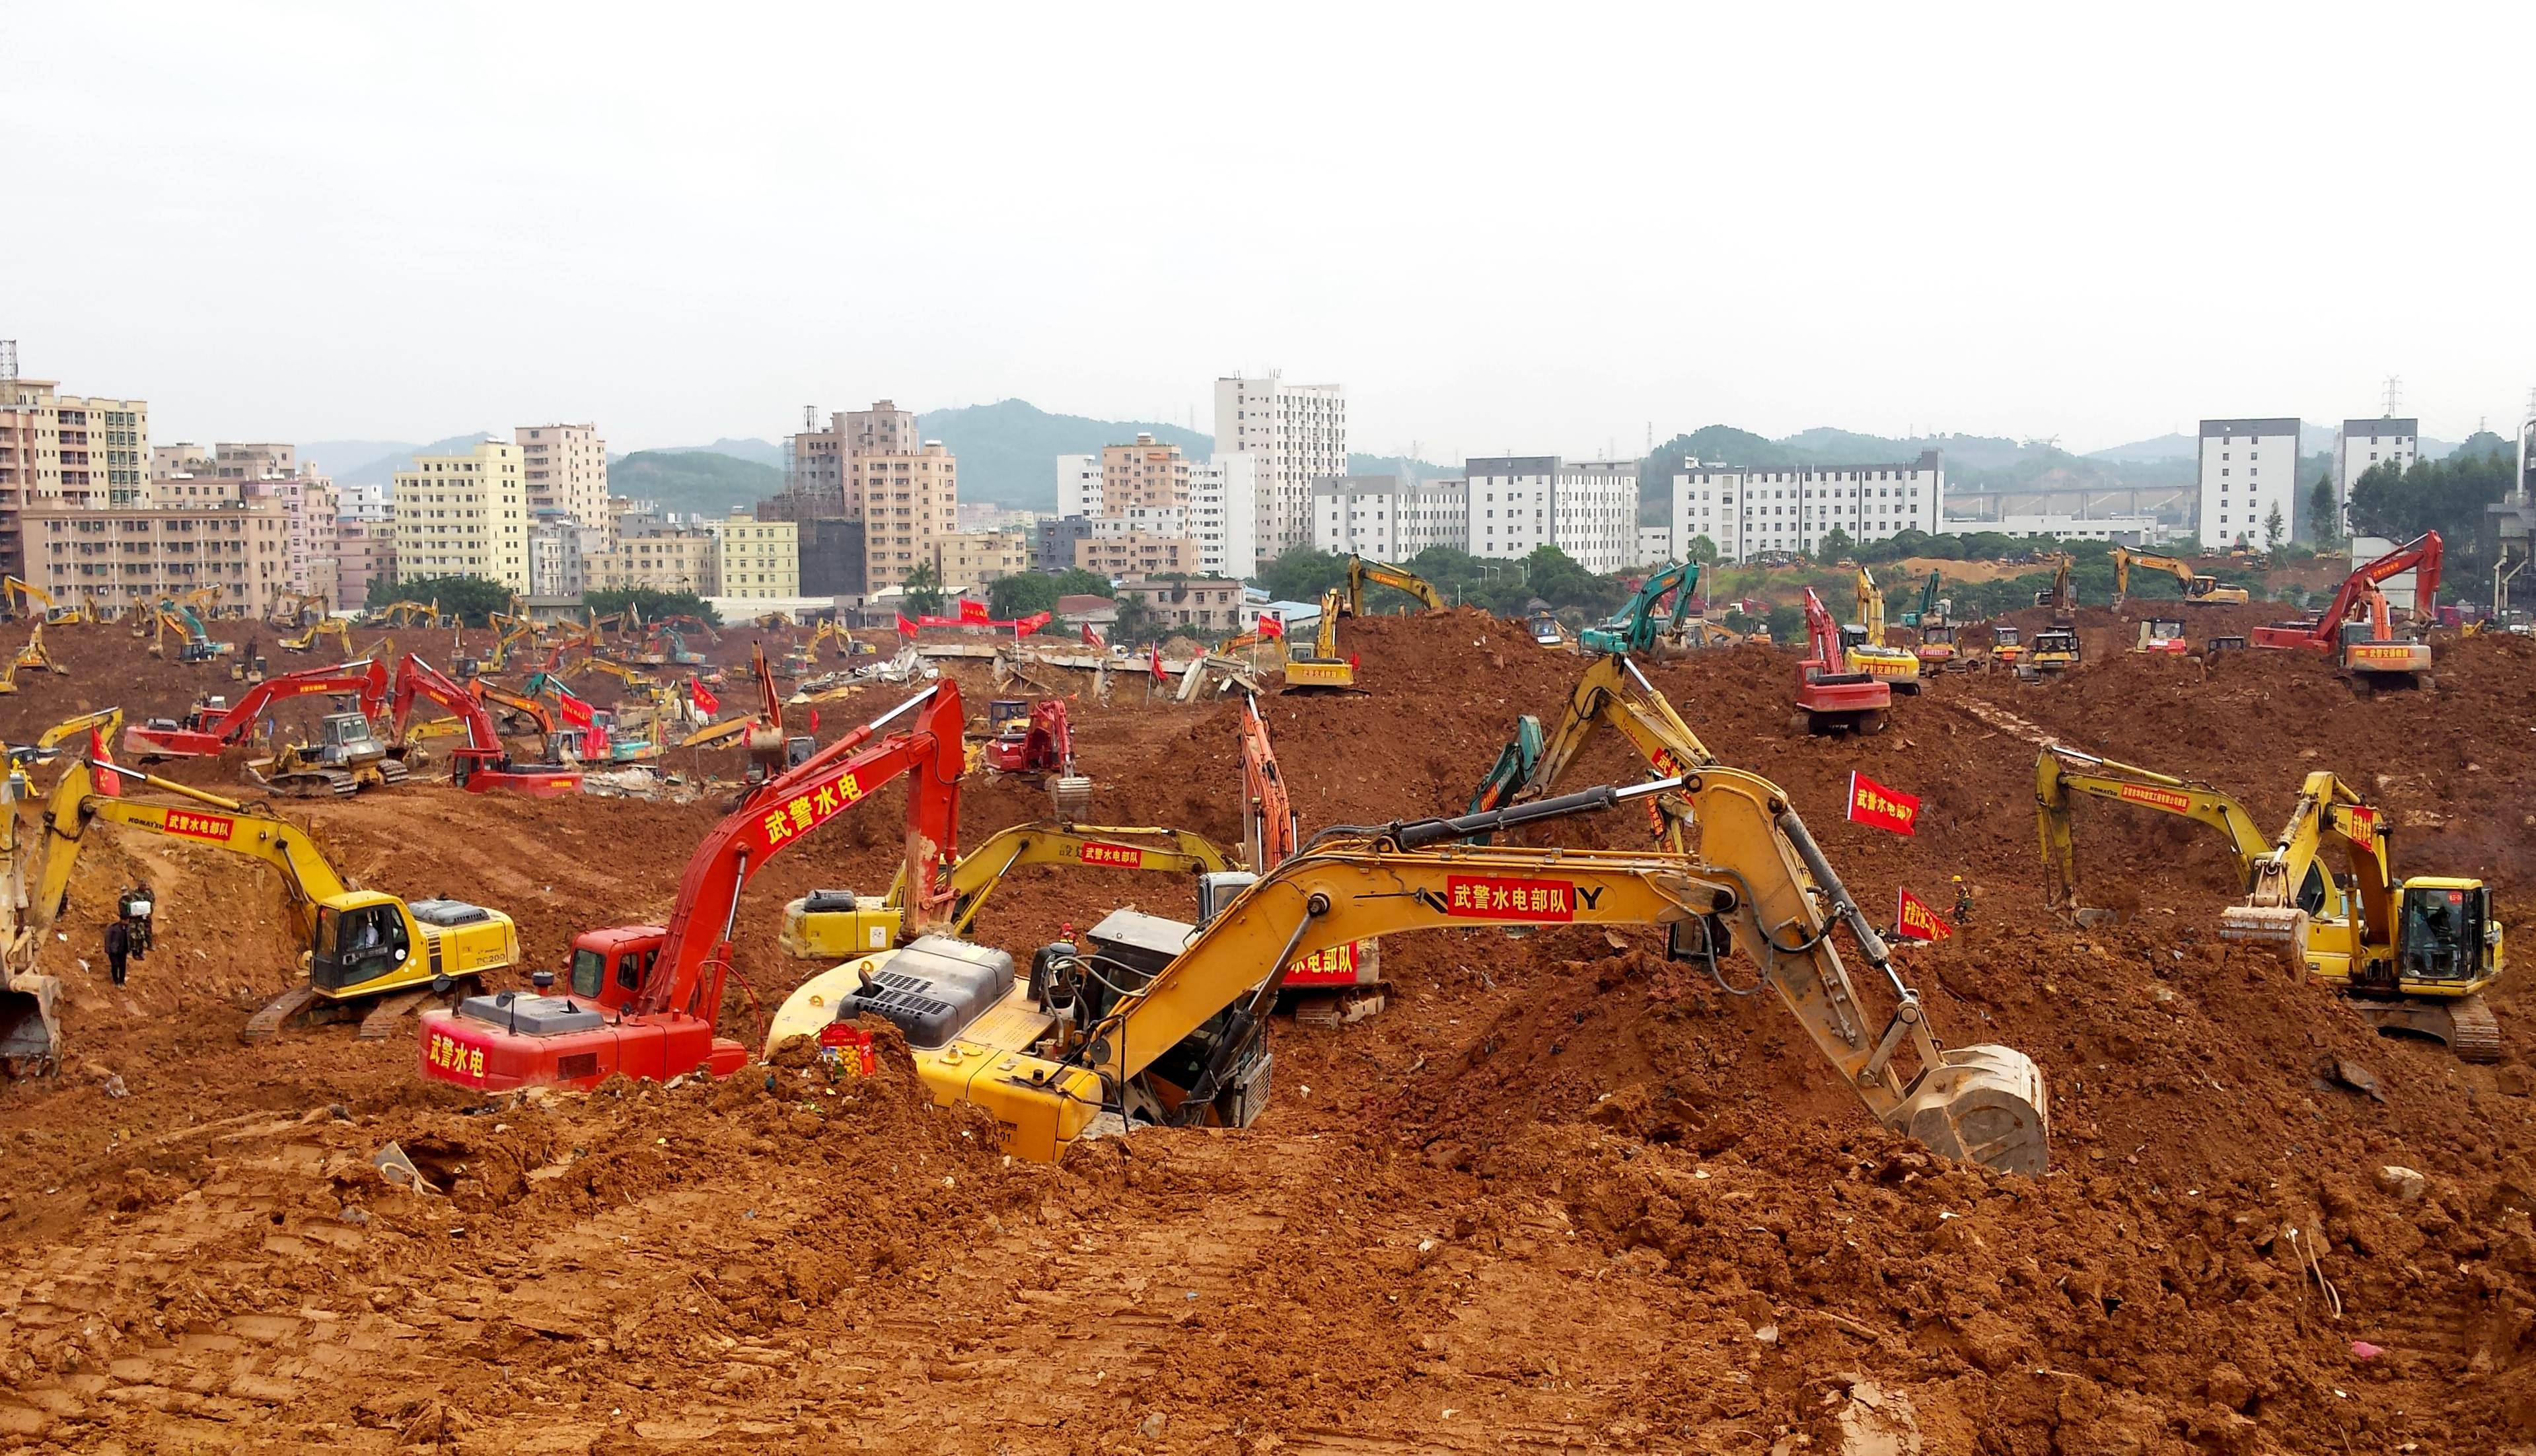 Excavators are seen working at the site of the landslide in an industrial area in Shenzhen, southern China's Guangdong province, on Dec. 28, 2015 (STR—AFP/Getty Images)